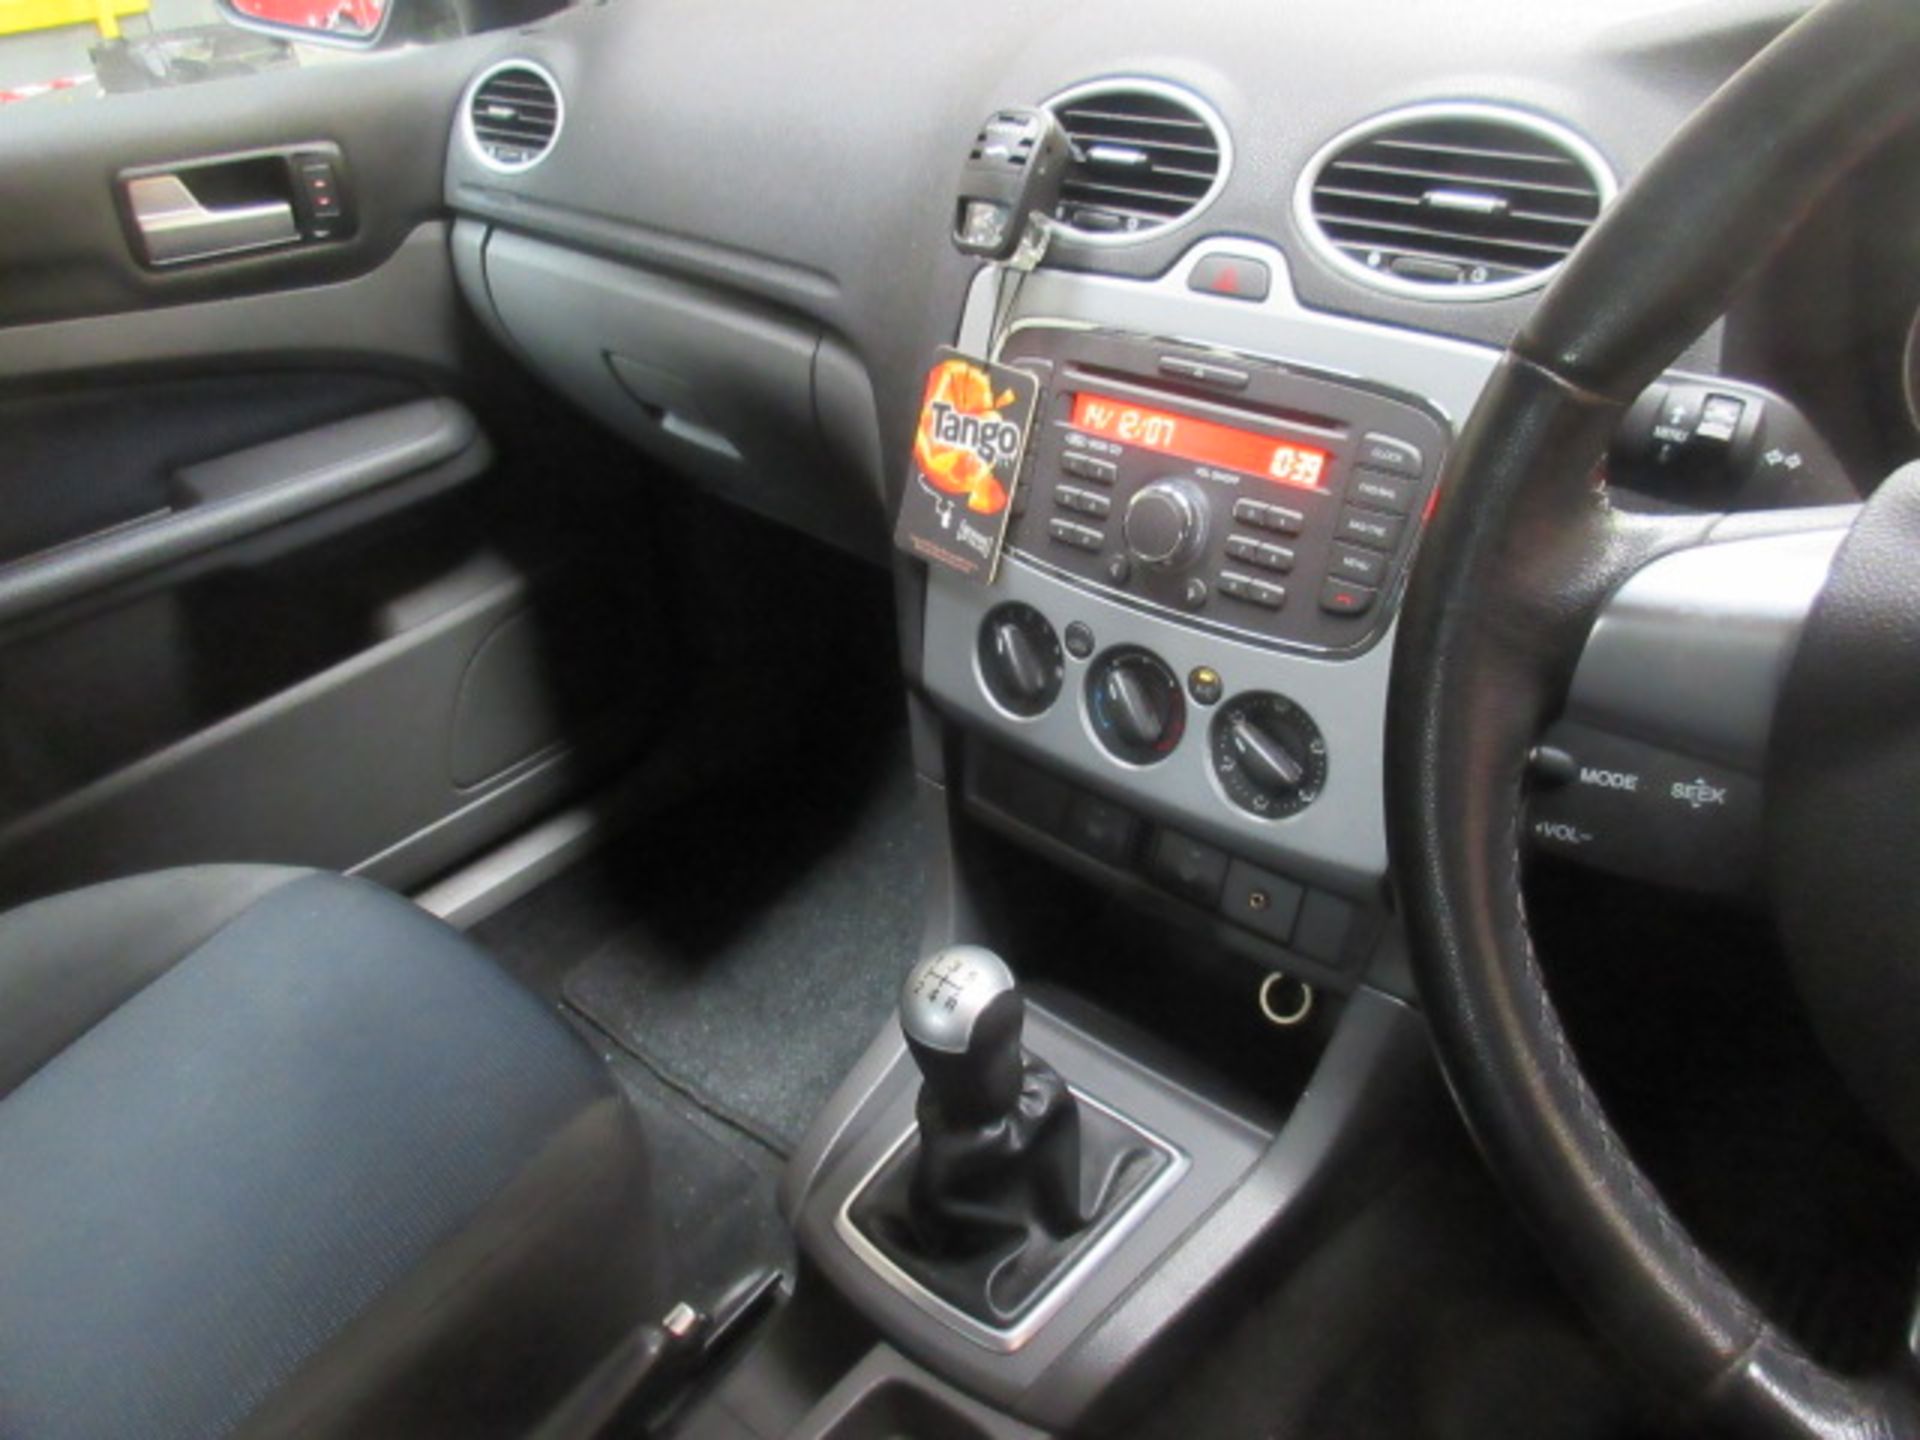 07 07 Ford Focus Zetec Climate 116 - Image 6 of 7